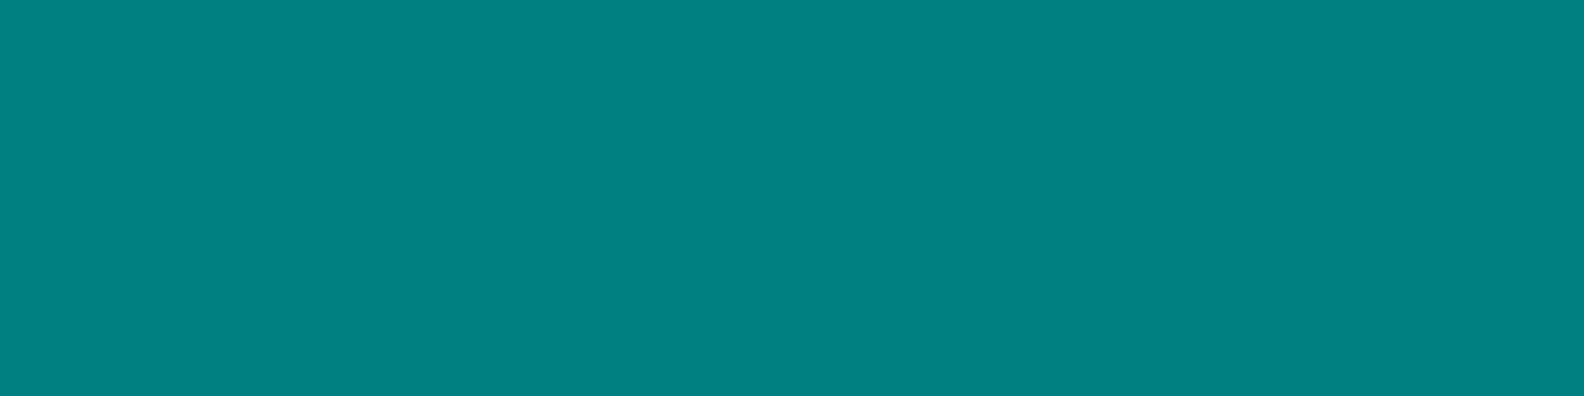 1584x396 Teal Solid Color Background